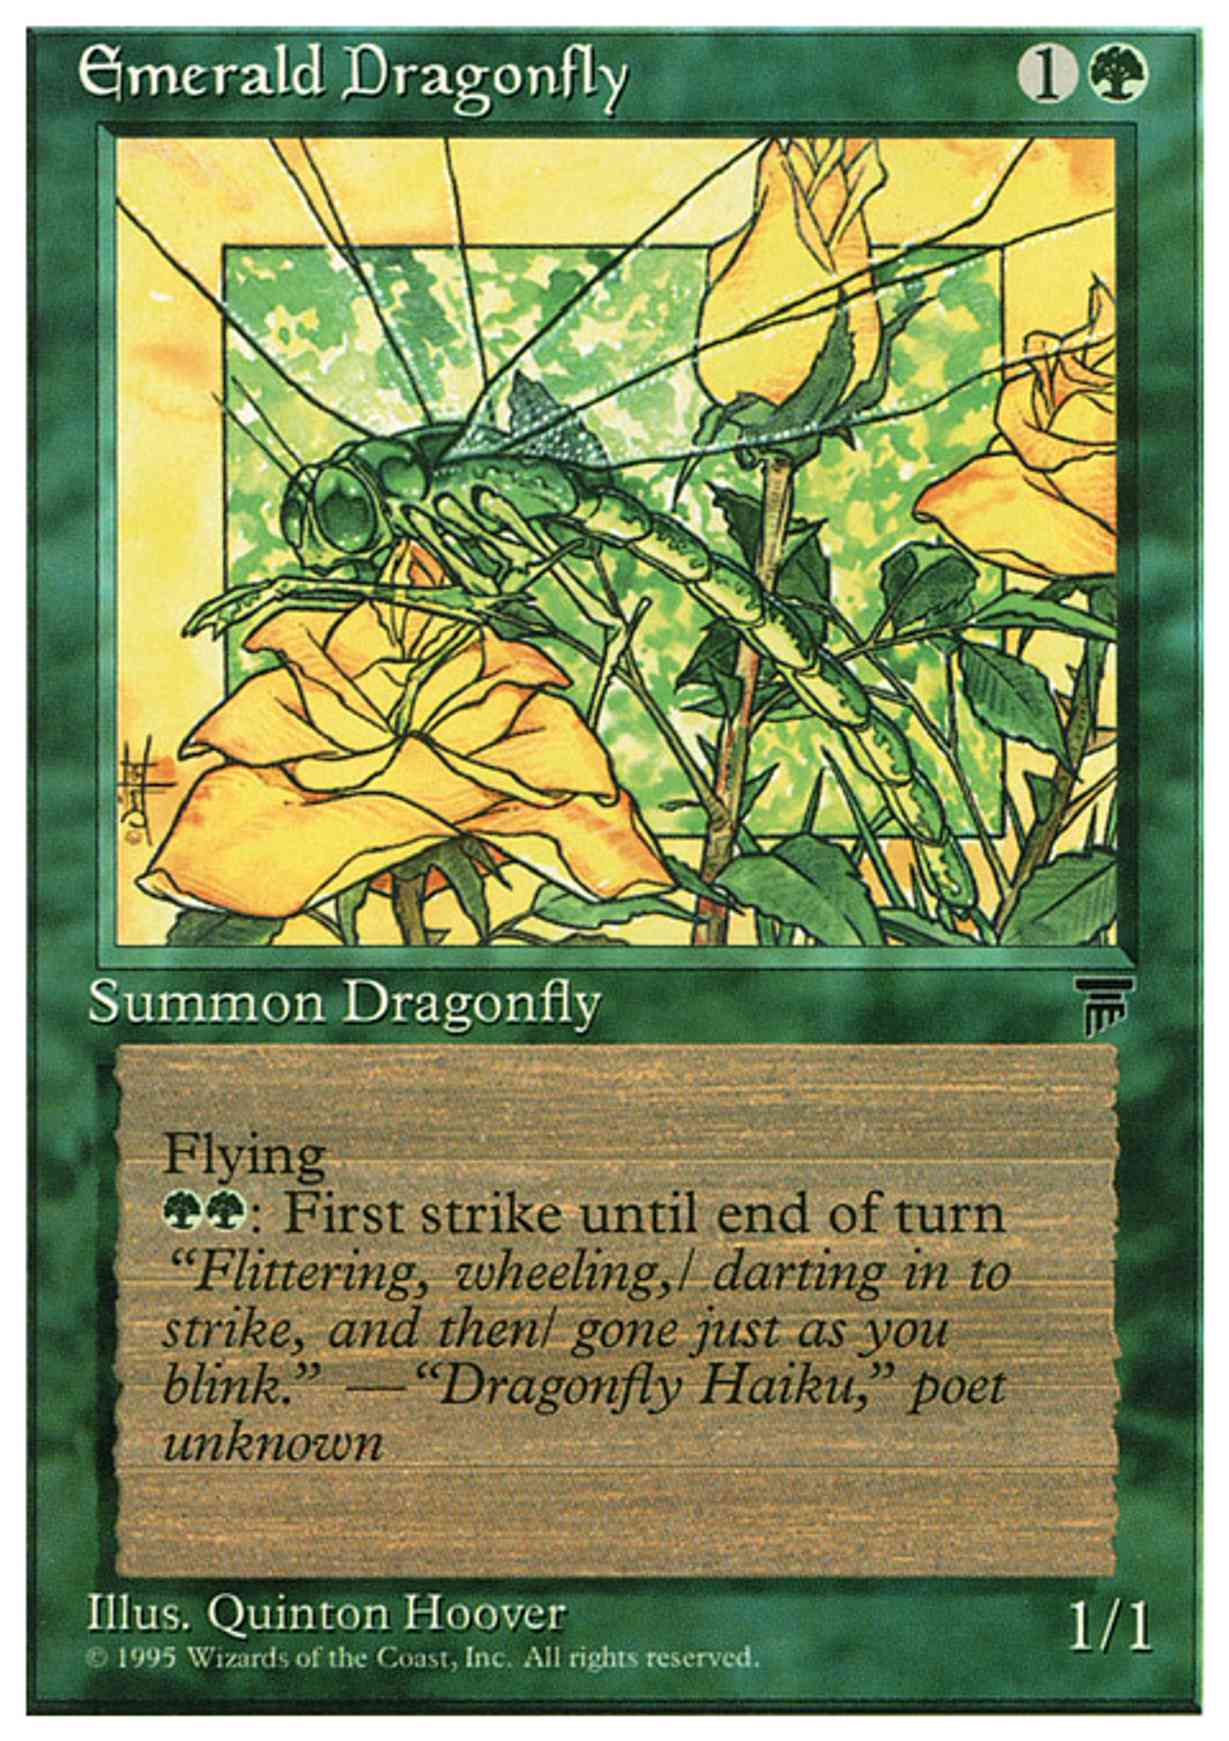 Emerald Dragonfly magic card front